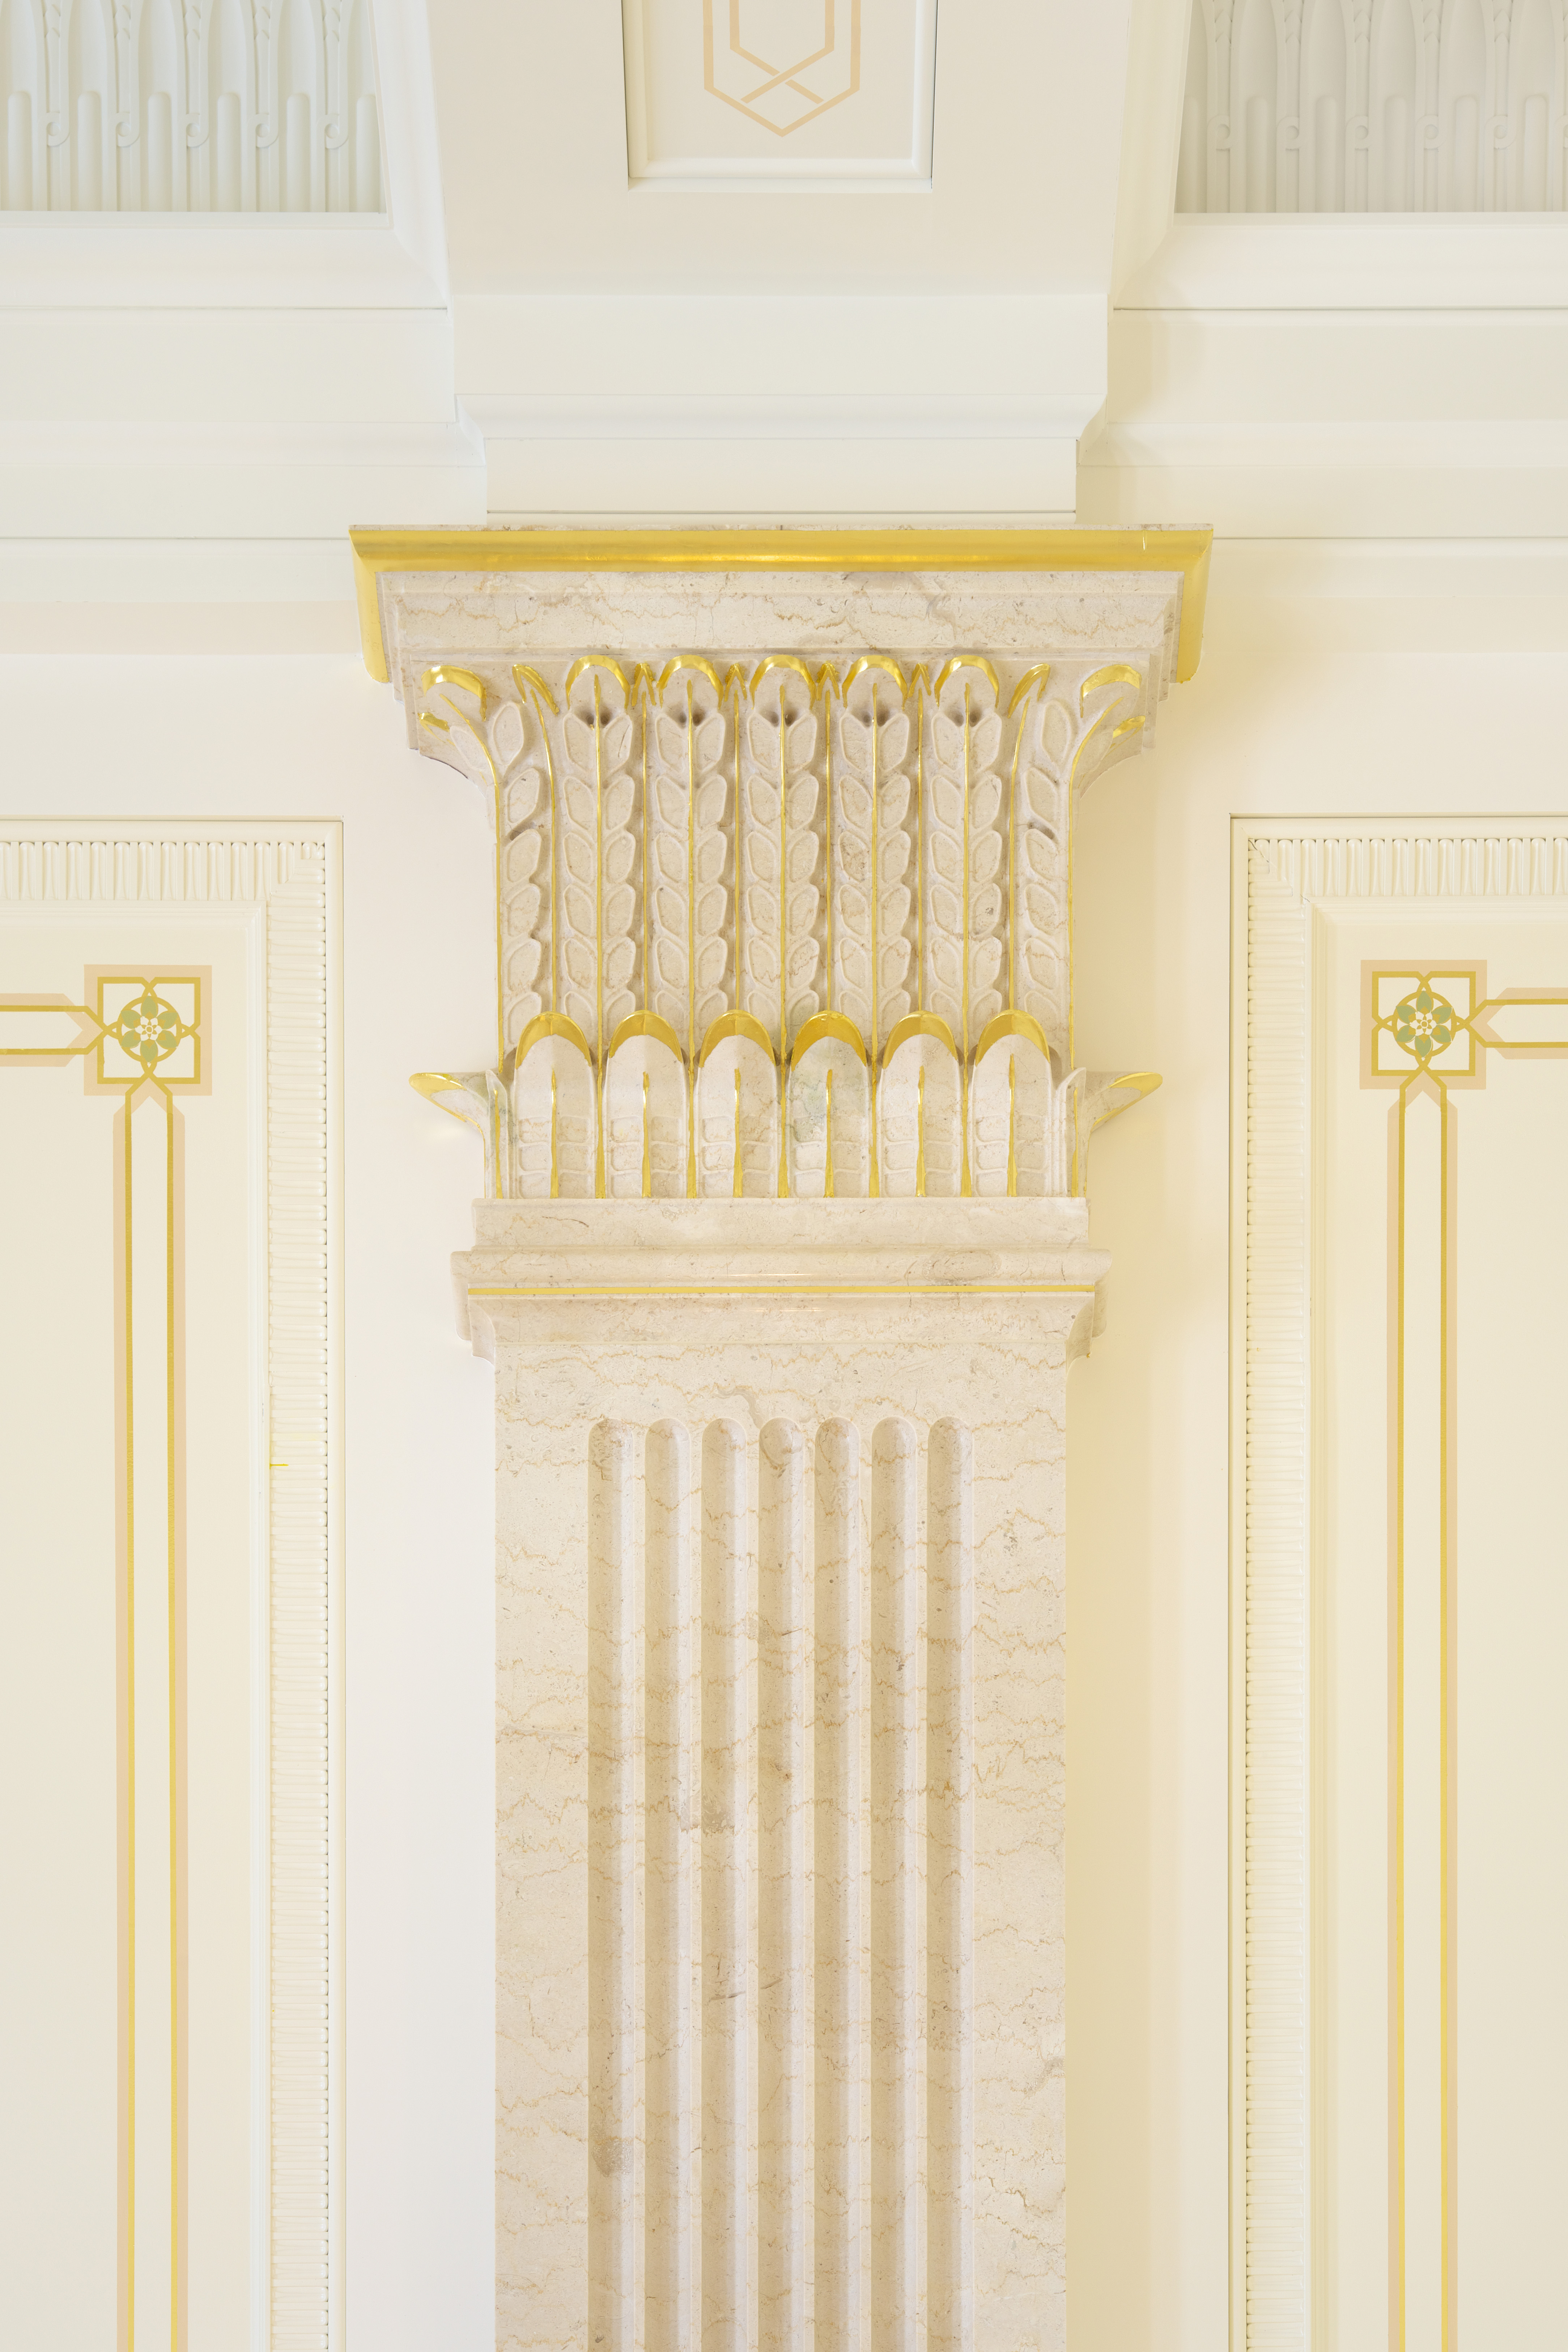 Indianapolis_Temple_Celestial_Room_Detail_2015.jpg